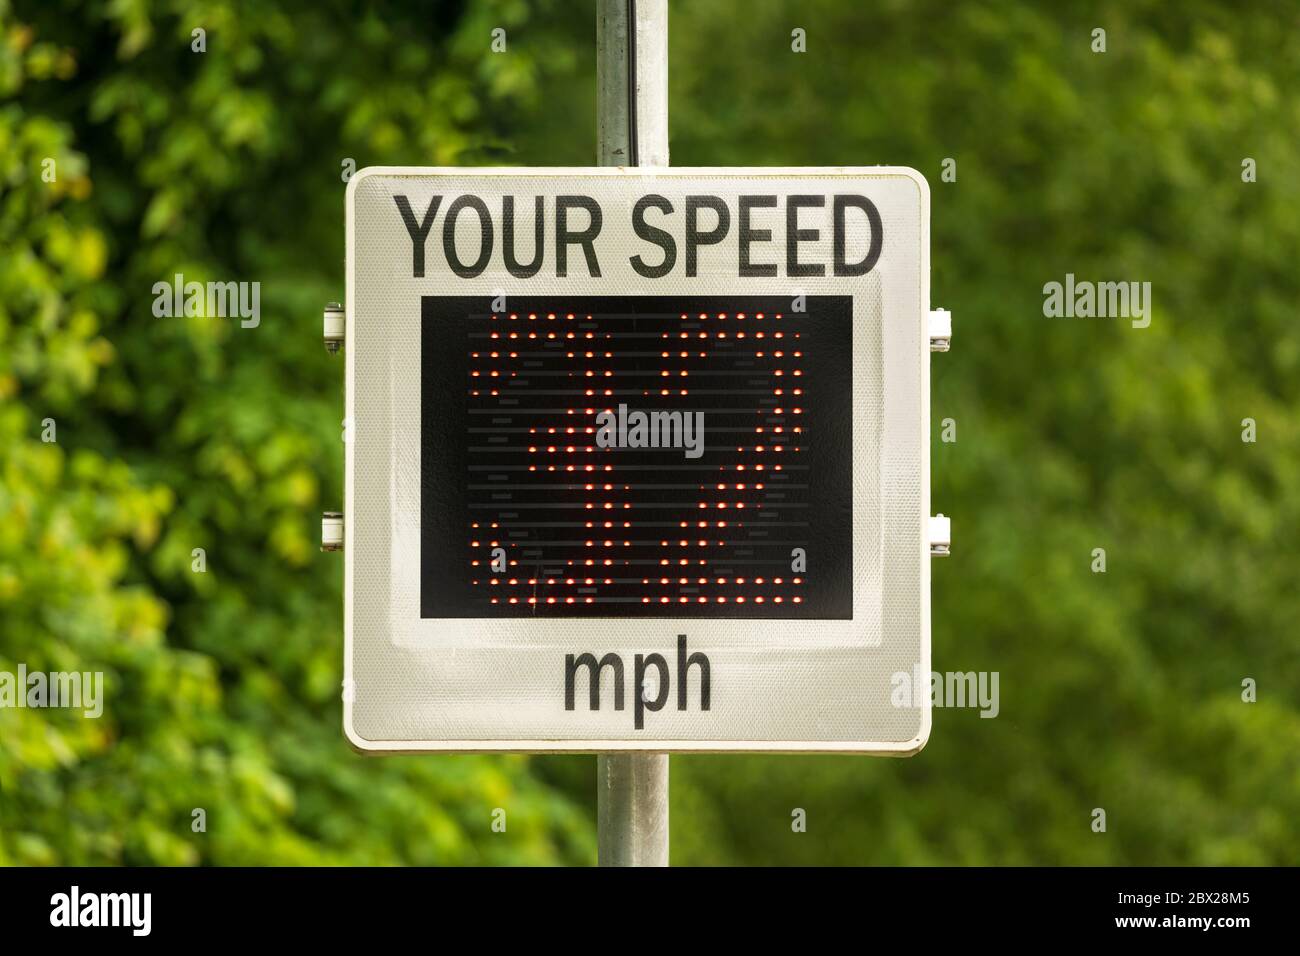 Speed Indicator Device (SID) that measures and displays the speed of approaching cars. UK. Other screen variations available in my portfolio. Stock Photo